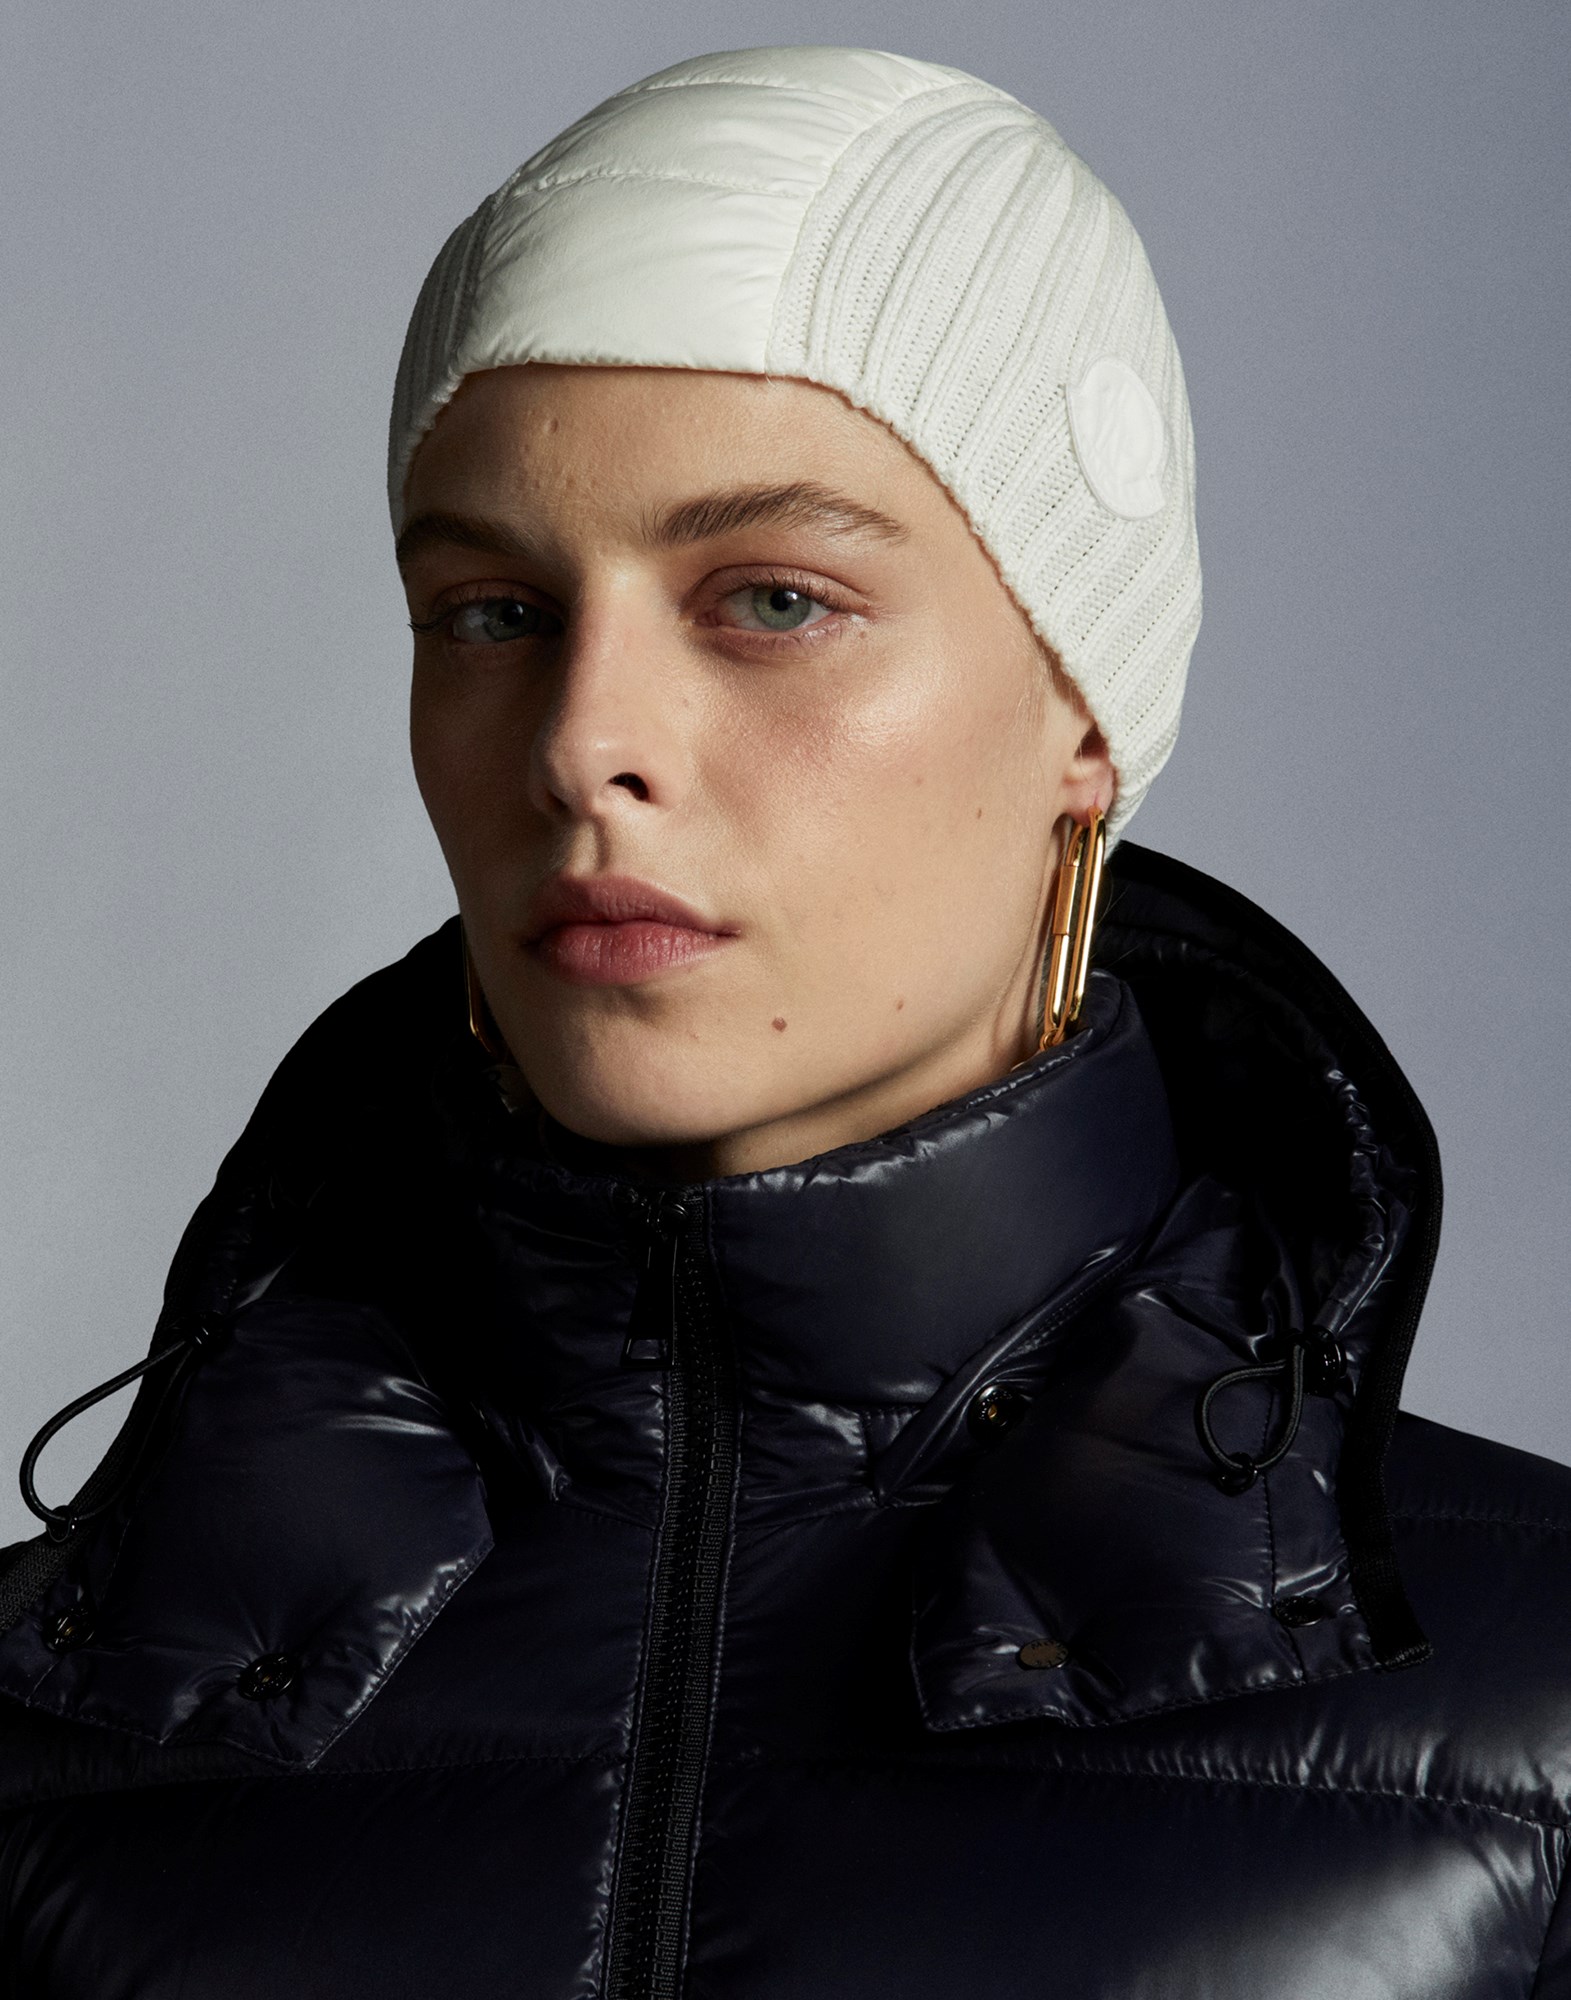 moncler moka shiny fitted puffer coat with hood